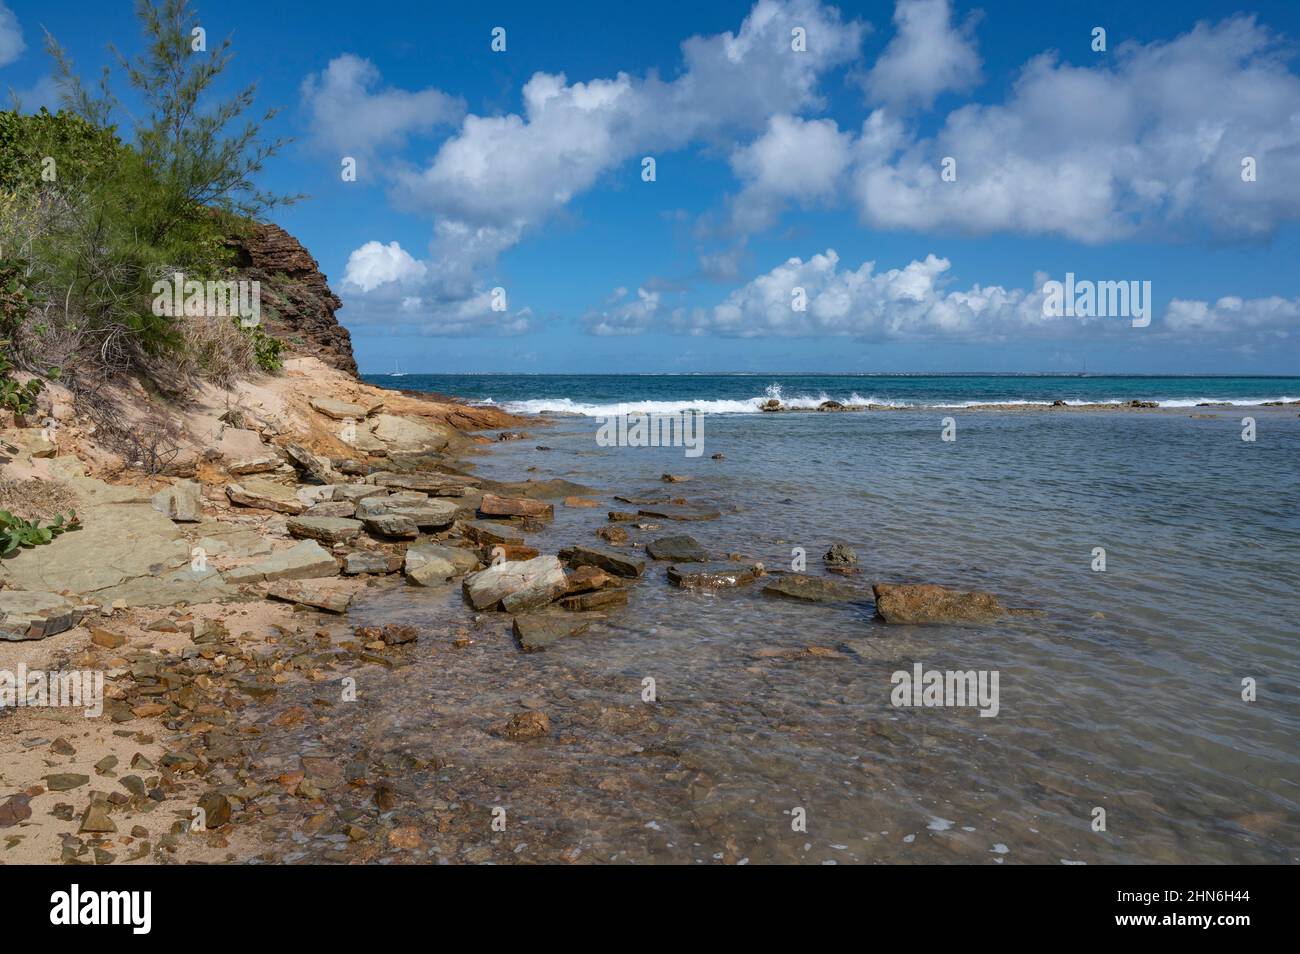 The coast of Saint-Martin at the Trou David, an eroded blowhole in the cliffs of the Caribean island Stock Photo